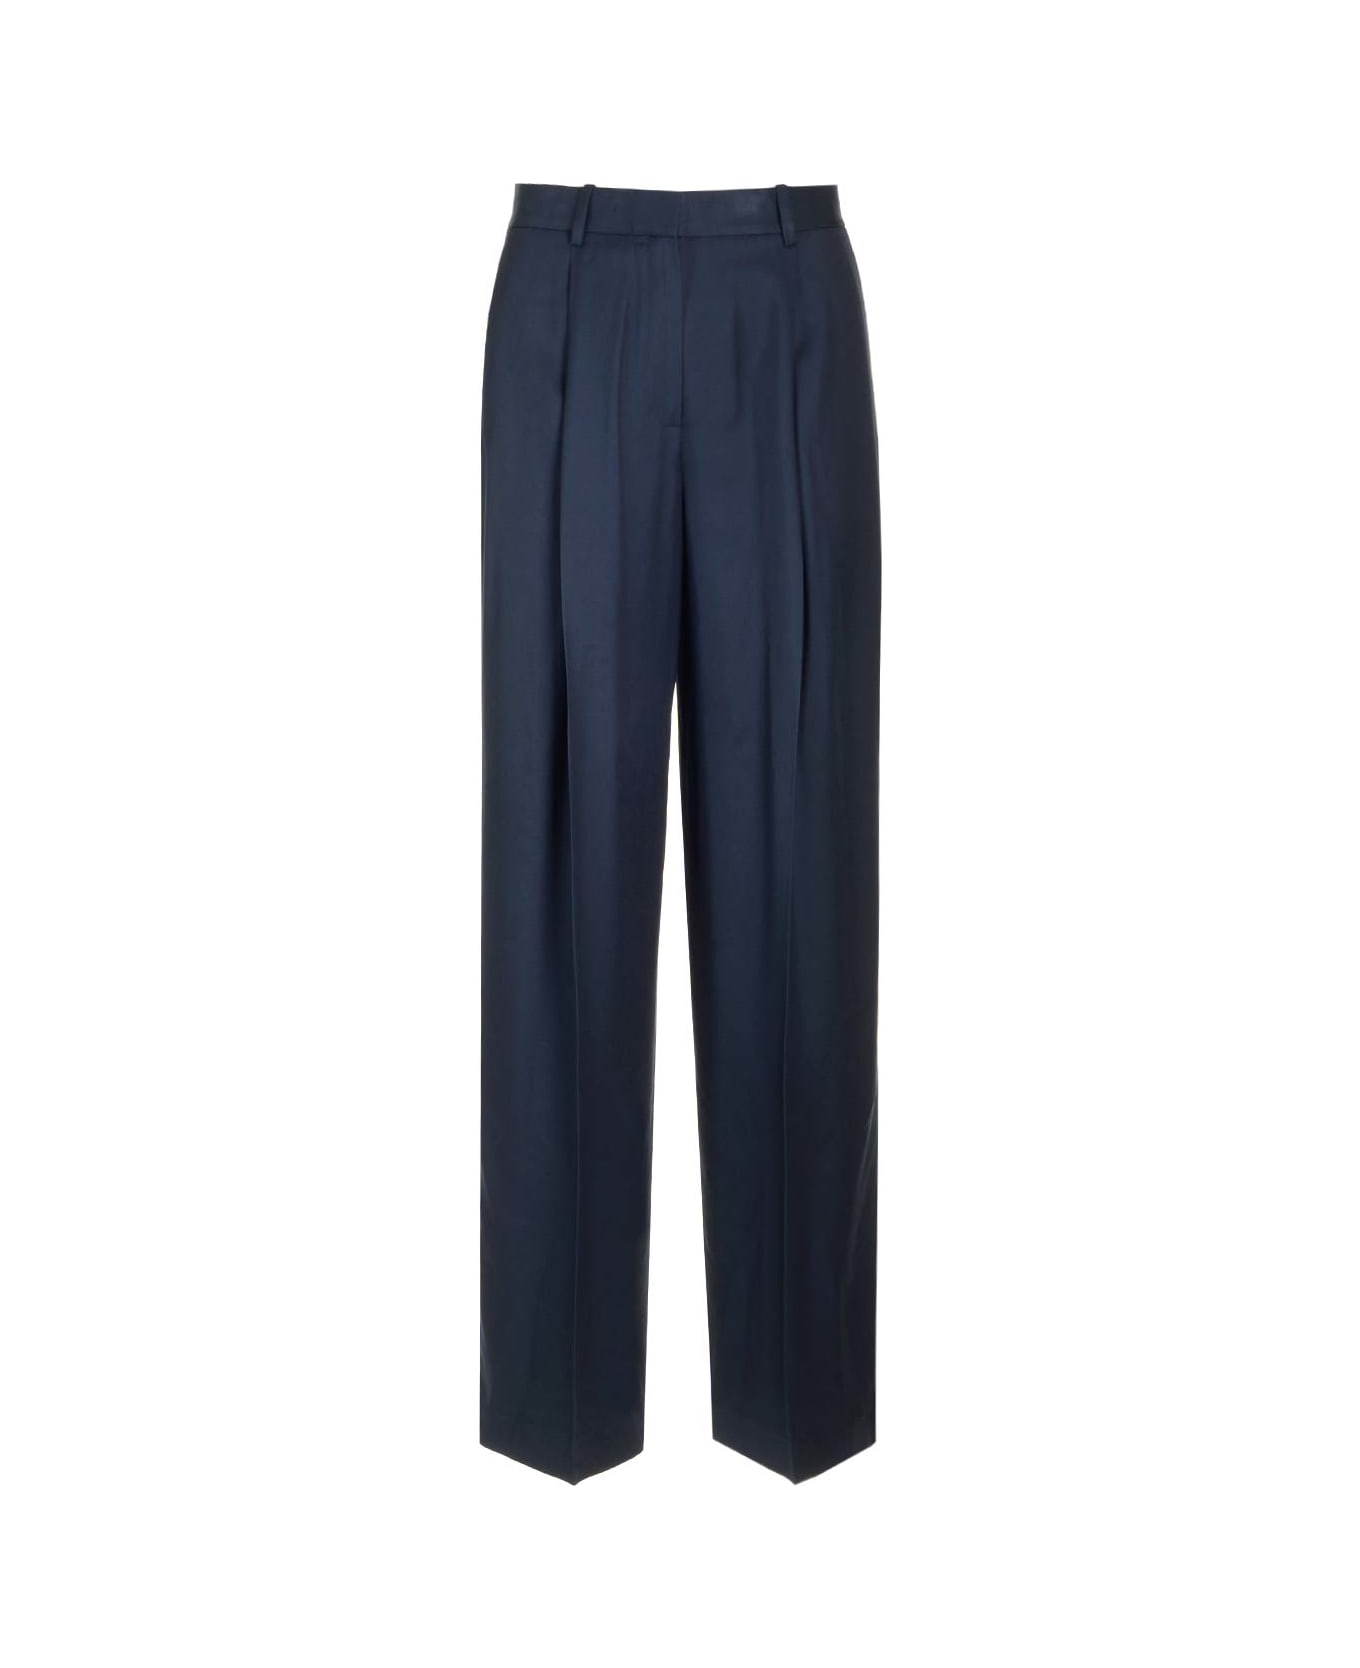 Theory Midnight Blue Satin Trousers - Xlv Nocturne Navy ボトムス